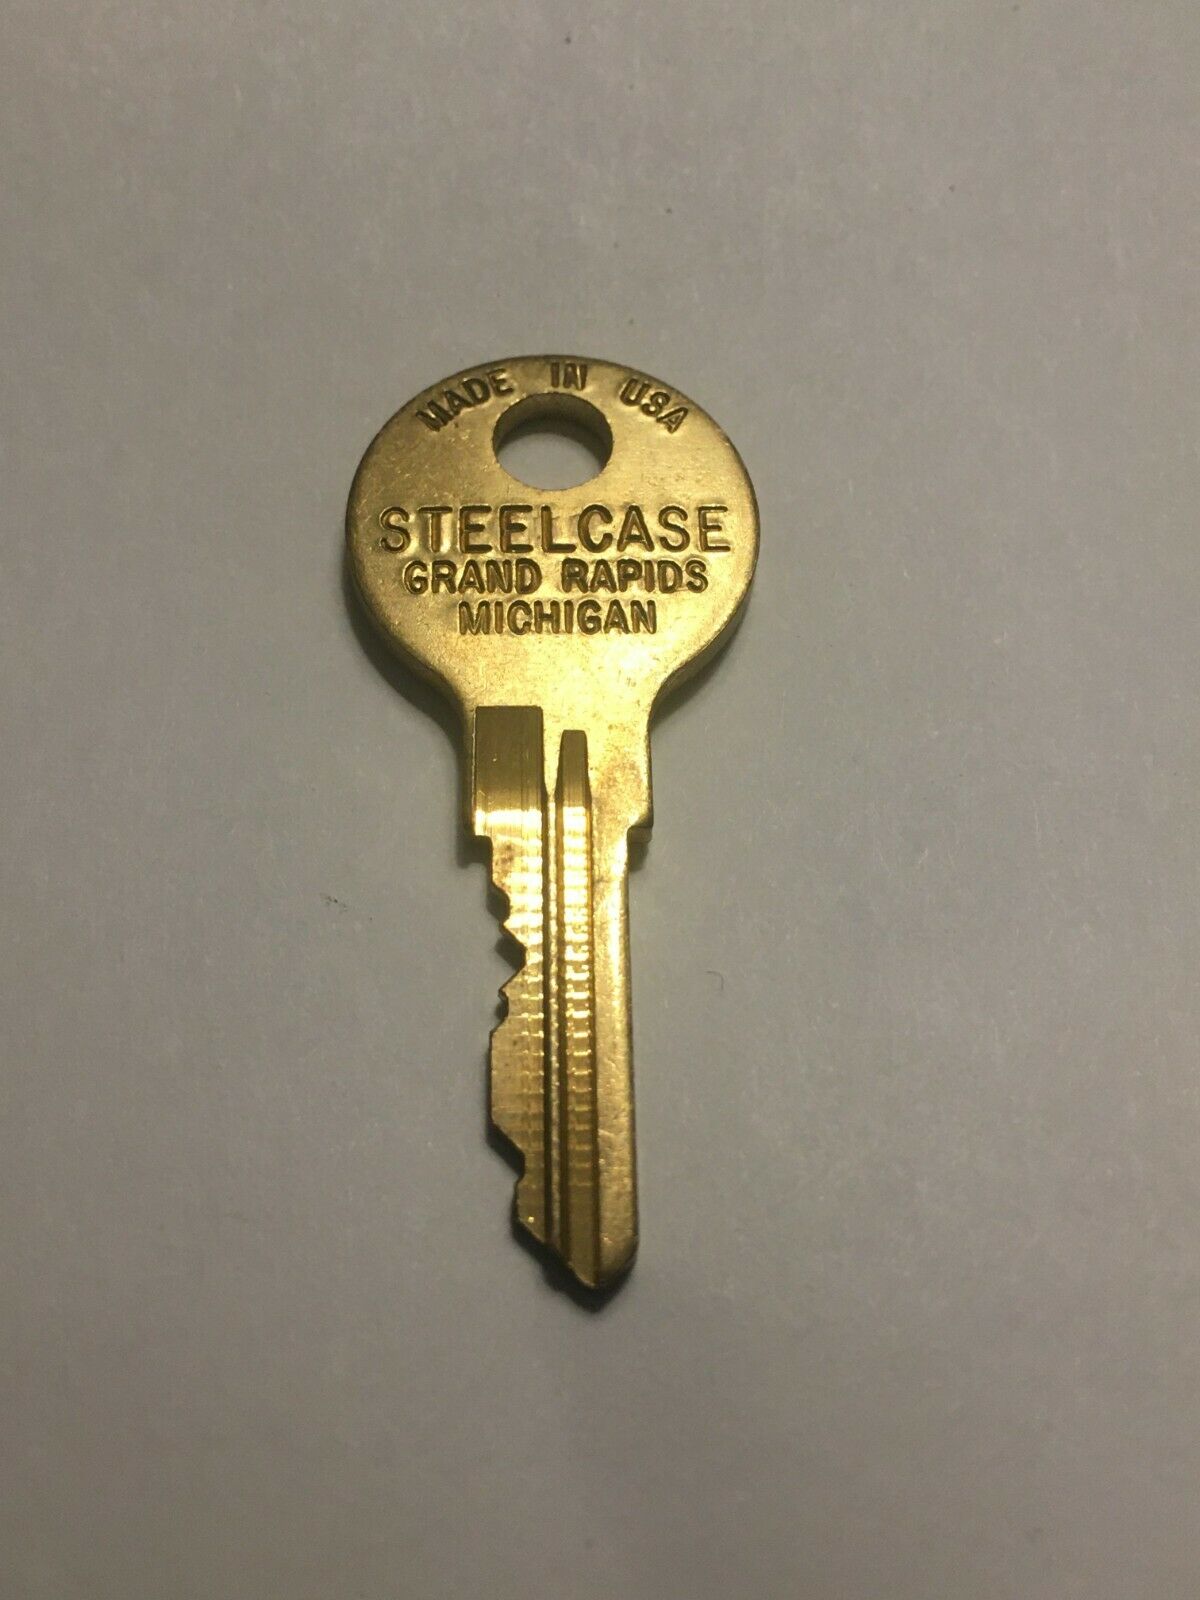 Replacement Steelcase File Cabinet Key Fr306-fr789 Free Shipping 2+discount Used